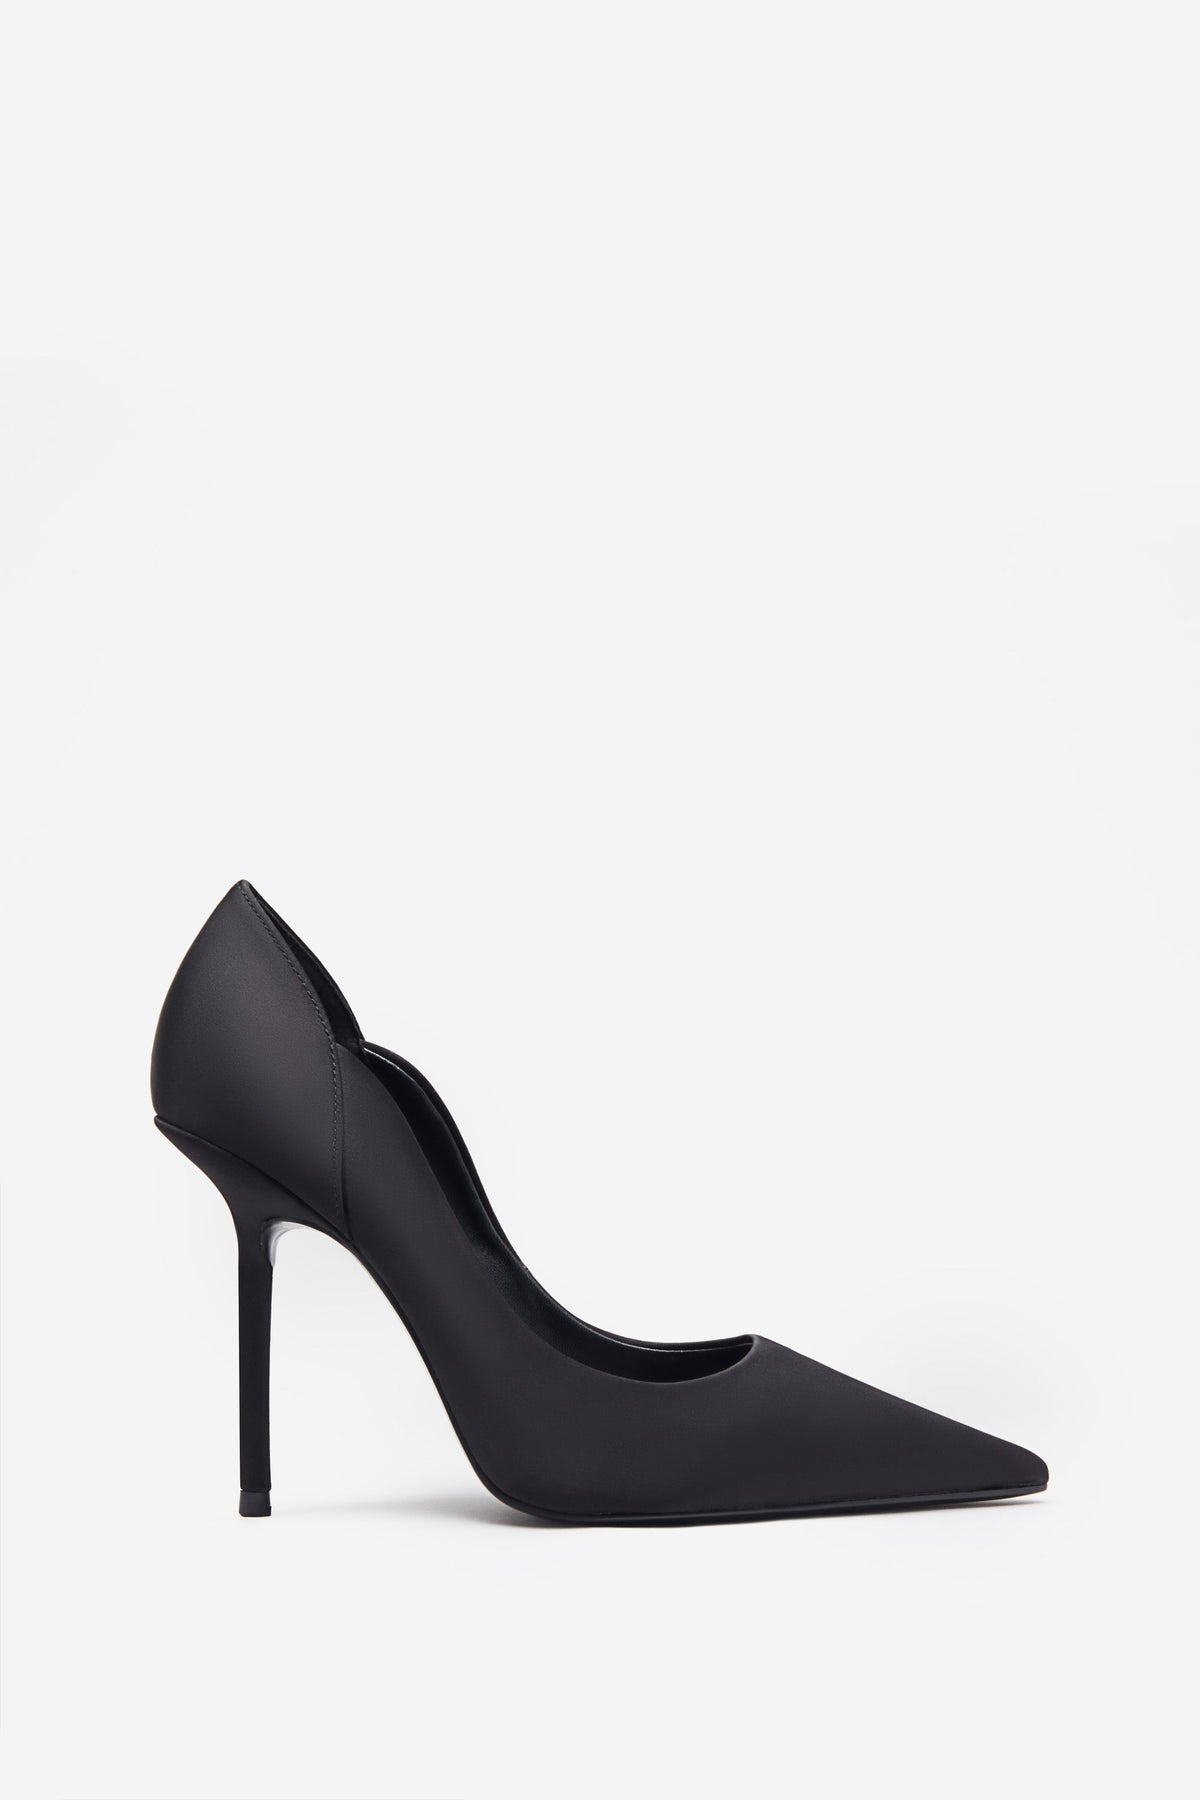 Black Patent Slant-Heel Pointed-Toe Pumps - CHARLES & KEITH IN